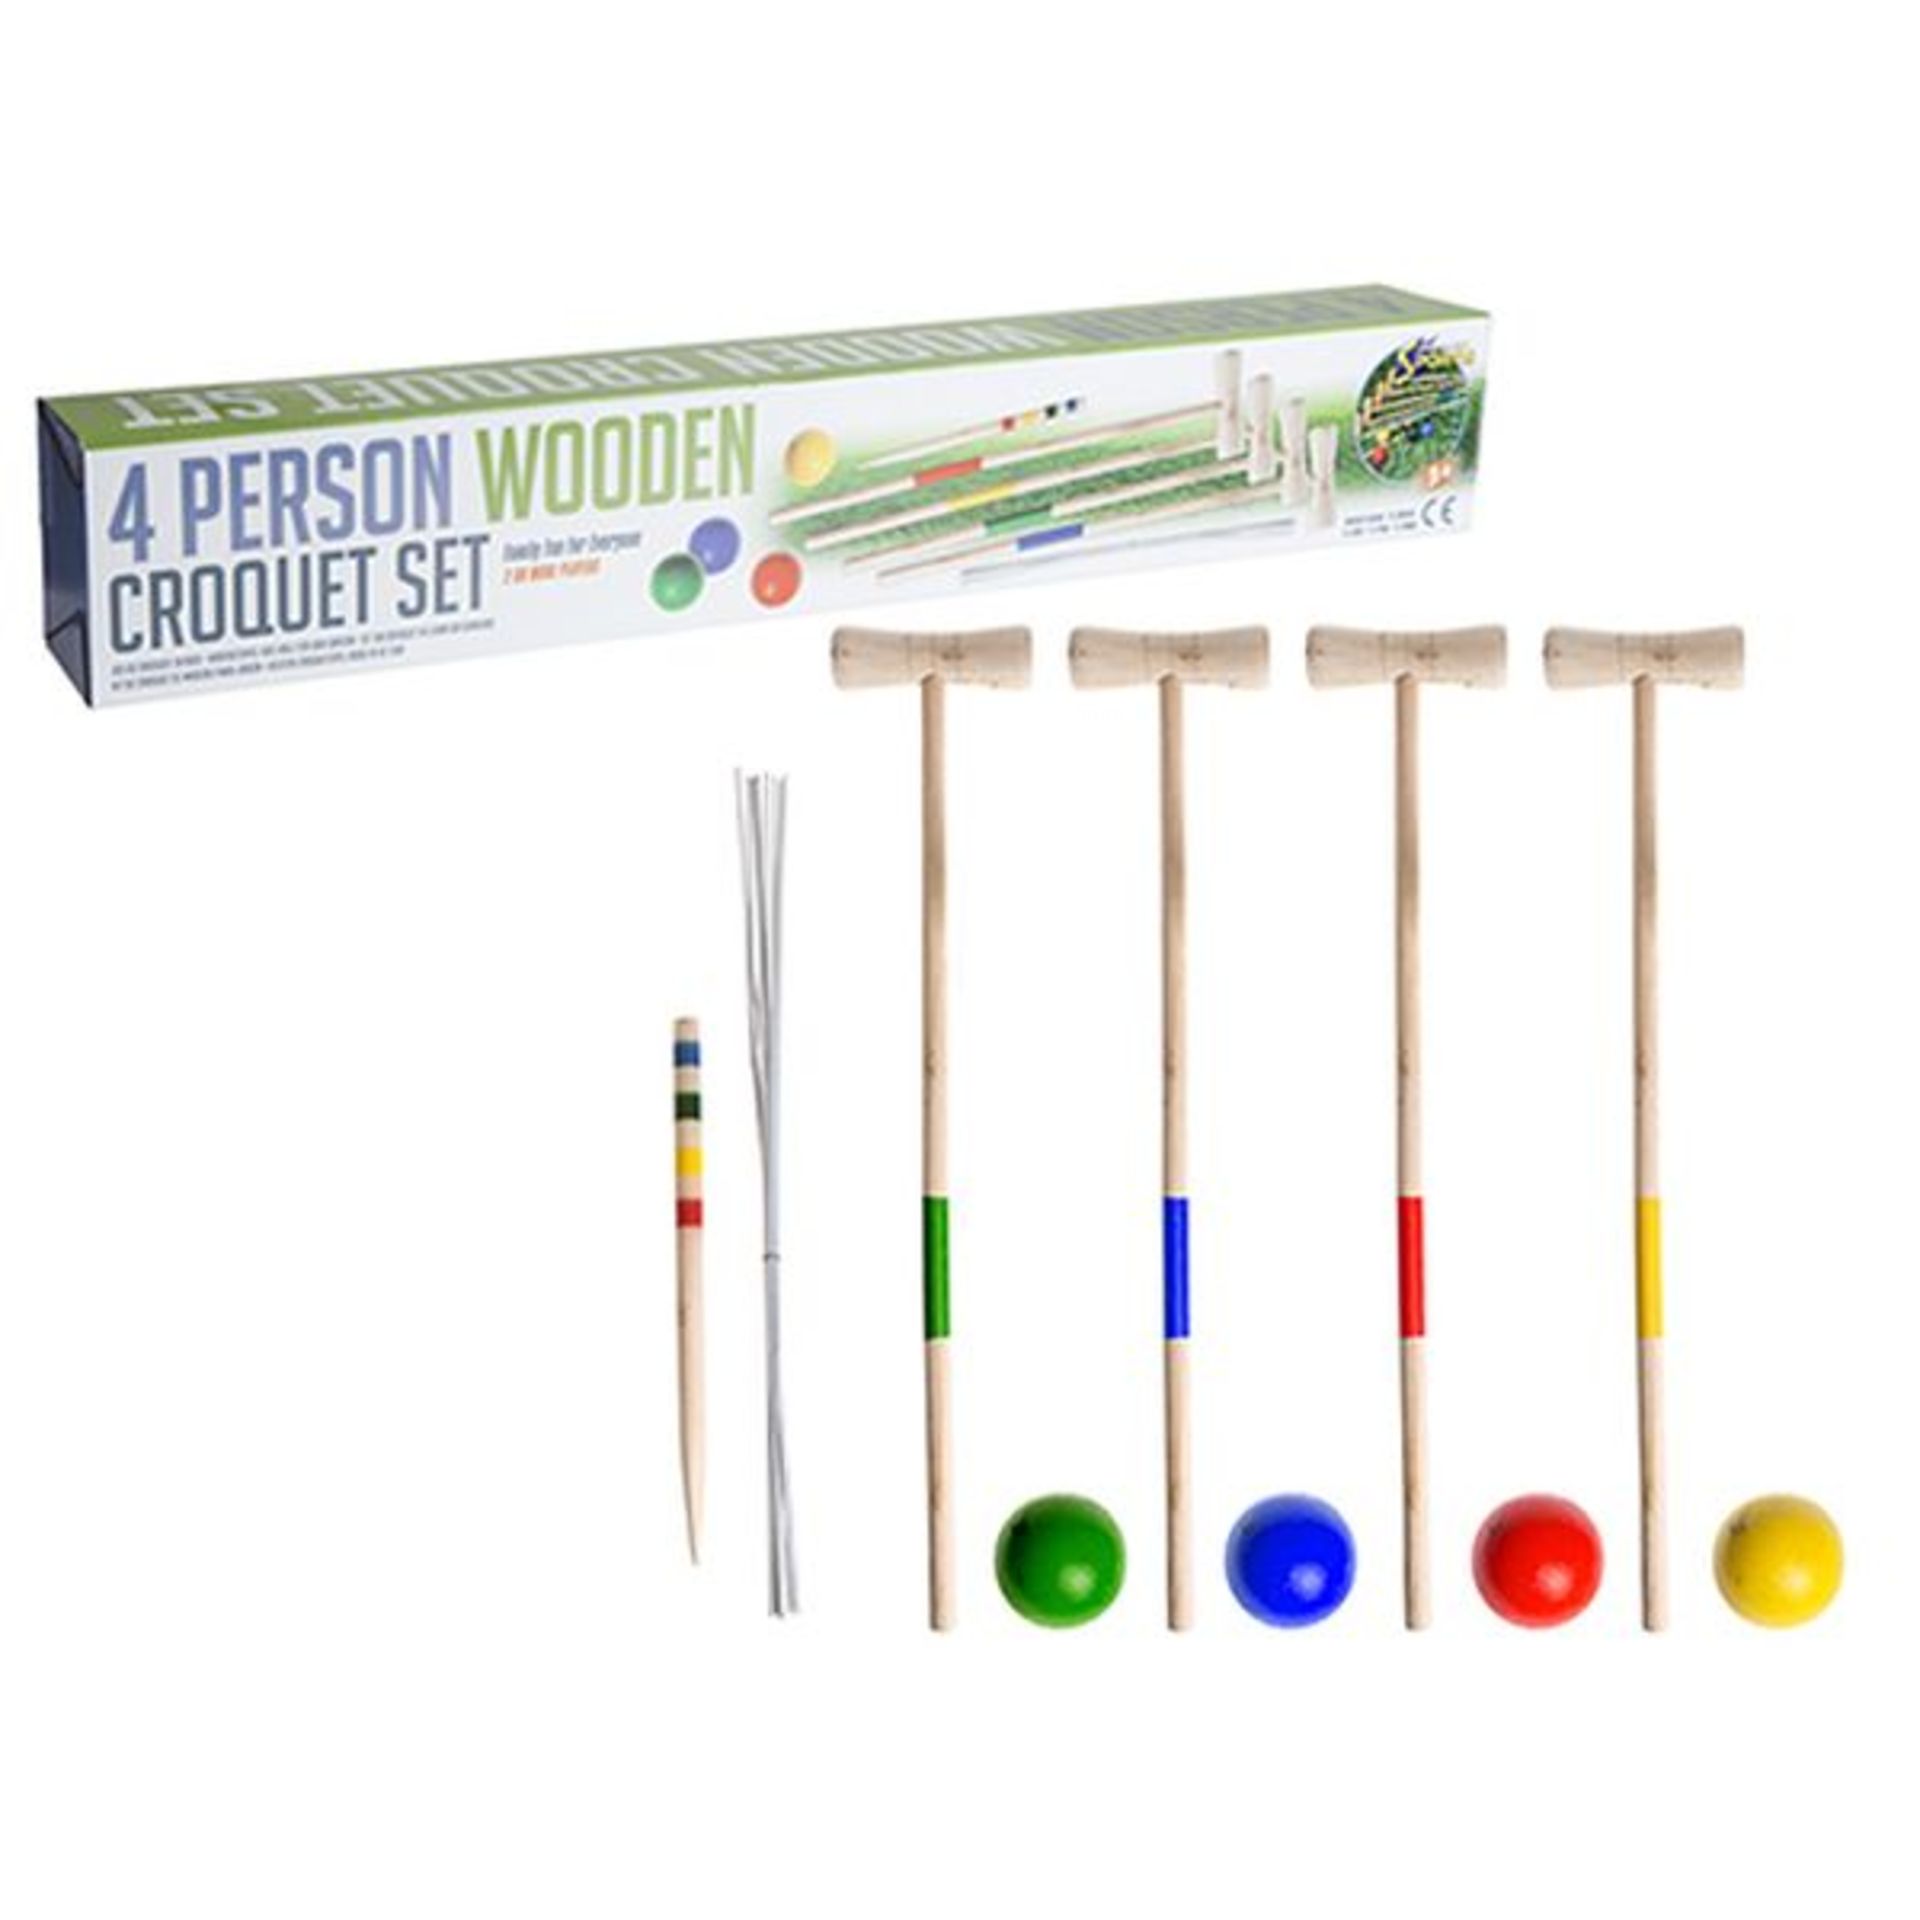 V Brand New Premier Sports Four Person Wooden Croquet Set X 2 YOUR BID PRICE TO BE MULTIPLIED BY